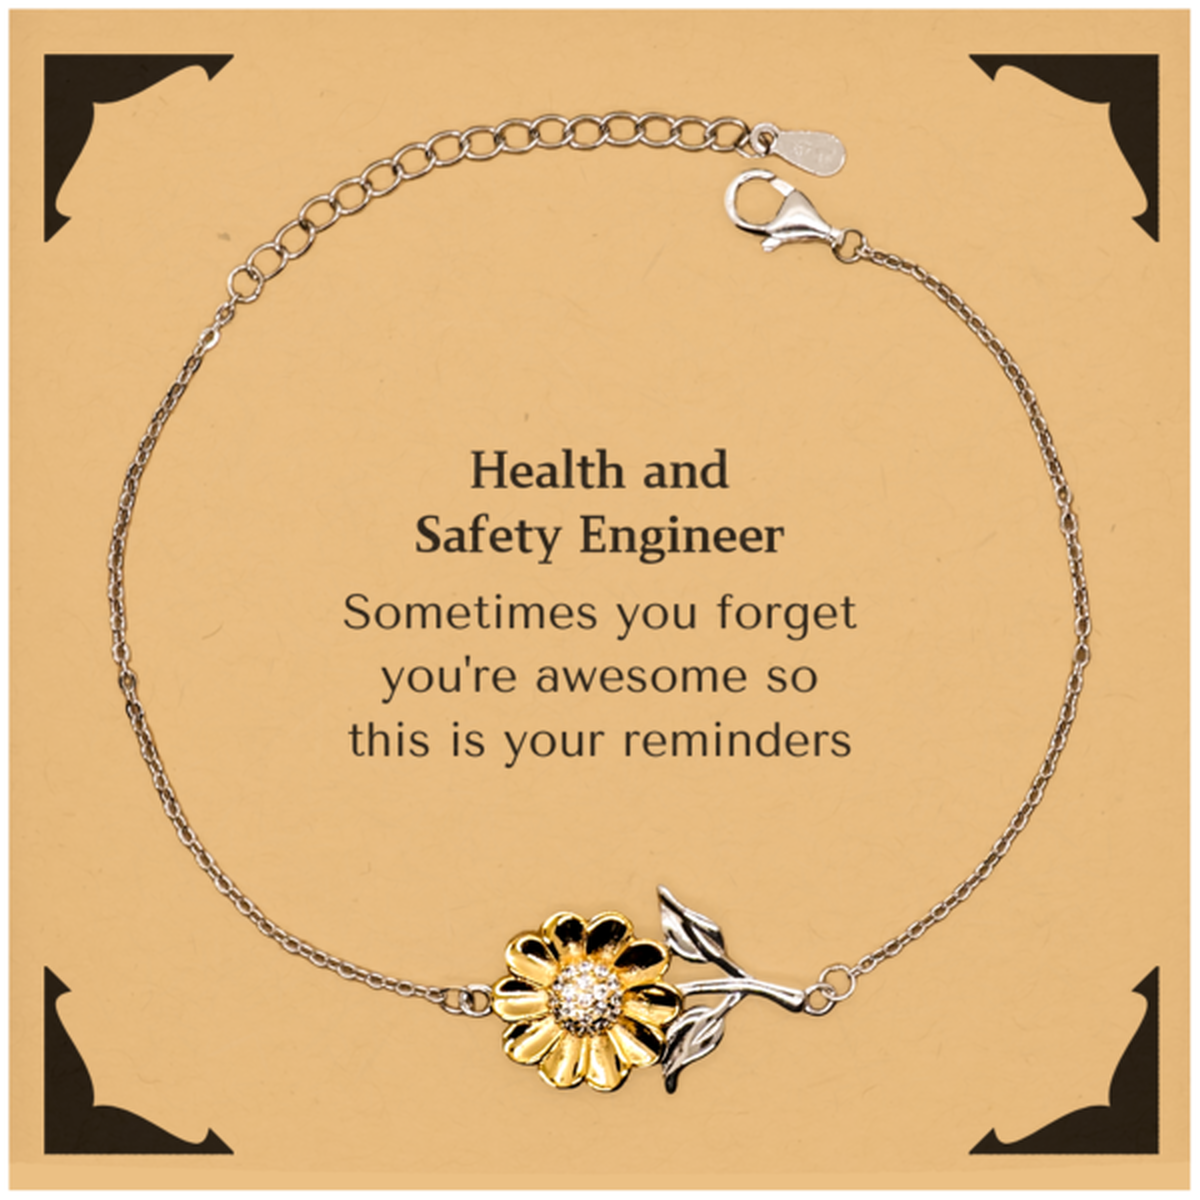 Sentimental Health and Safety Engineer Sunflower Bracelet, Health and Safety Engineer Sometimes you forget you're awesome so this is your reminders, Graduation Christmas Birthday Gifts for Health and Safety Engineer, Men, Women, Coworkers